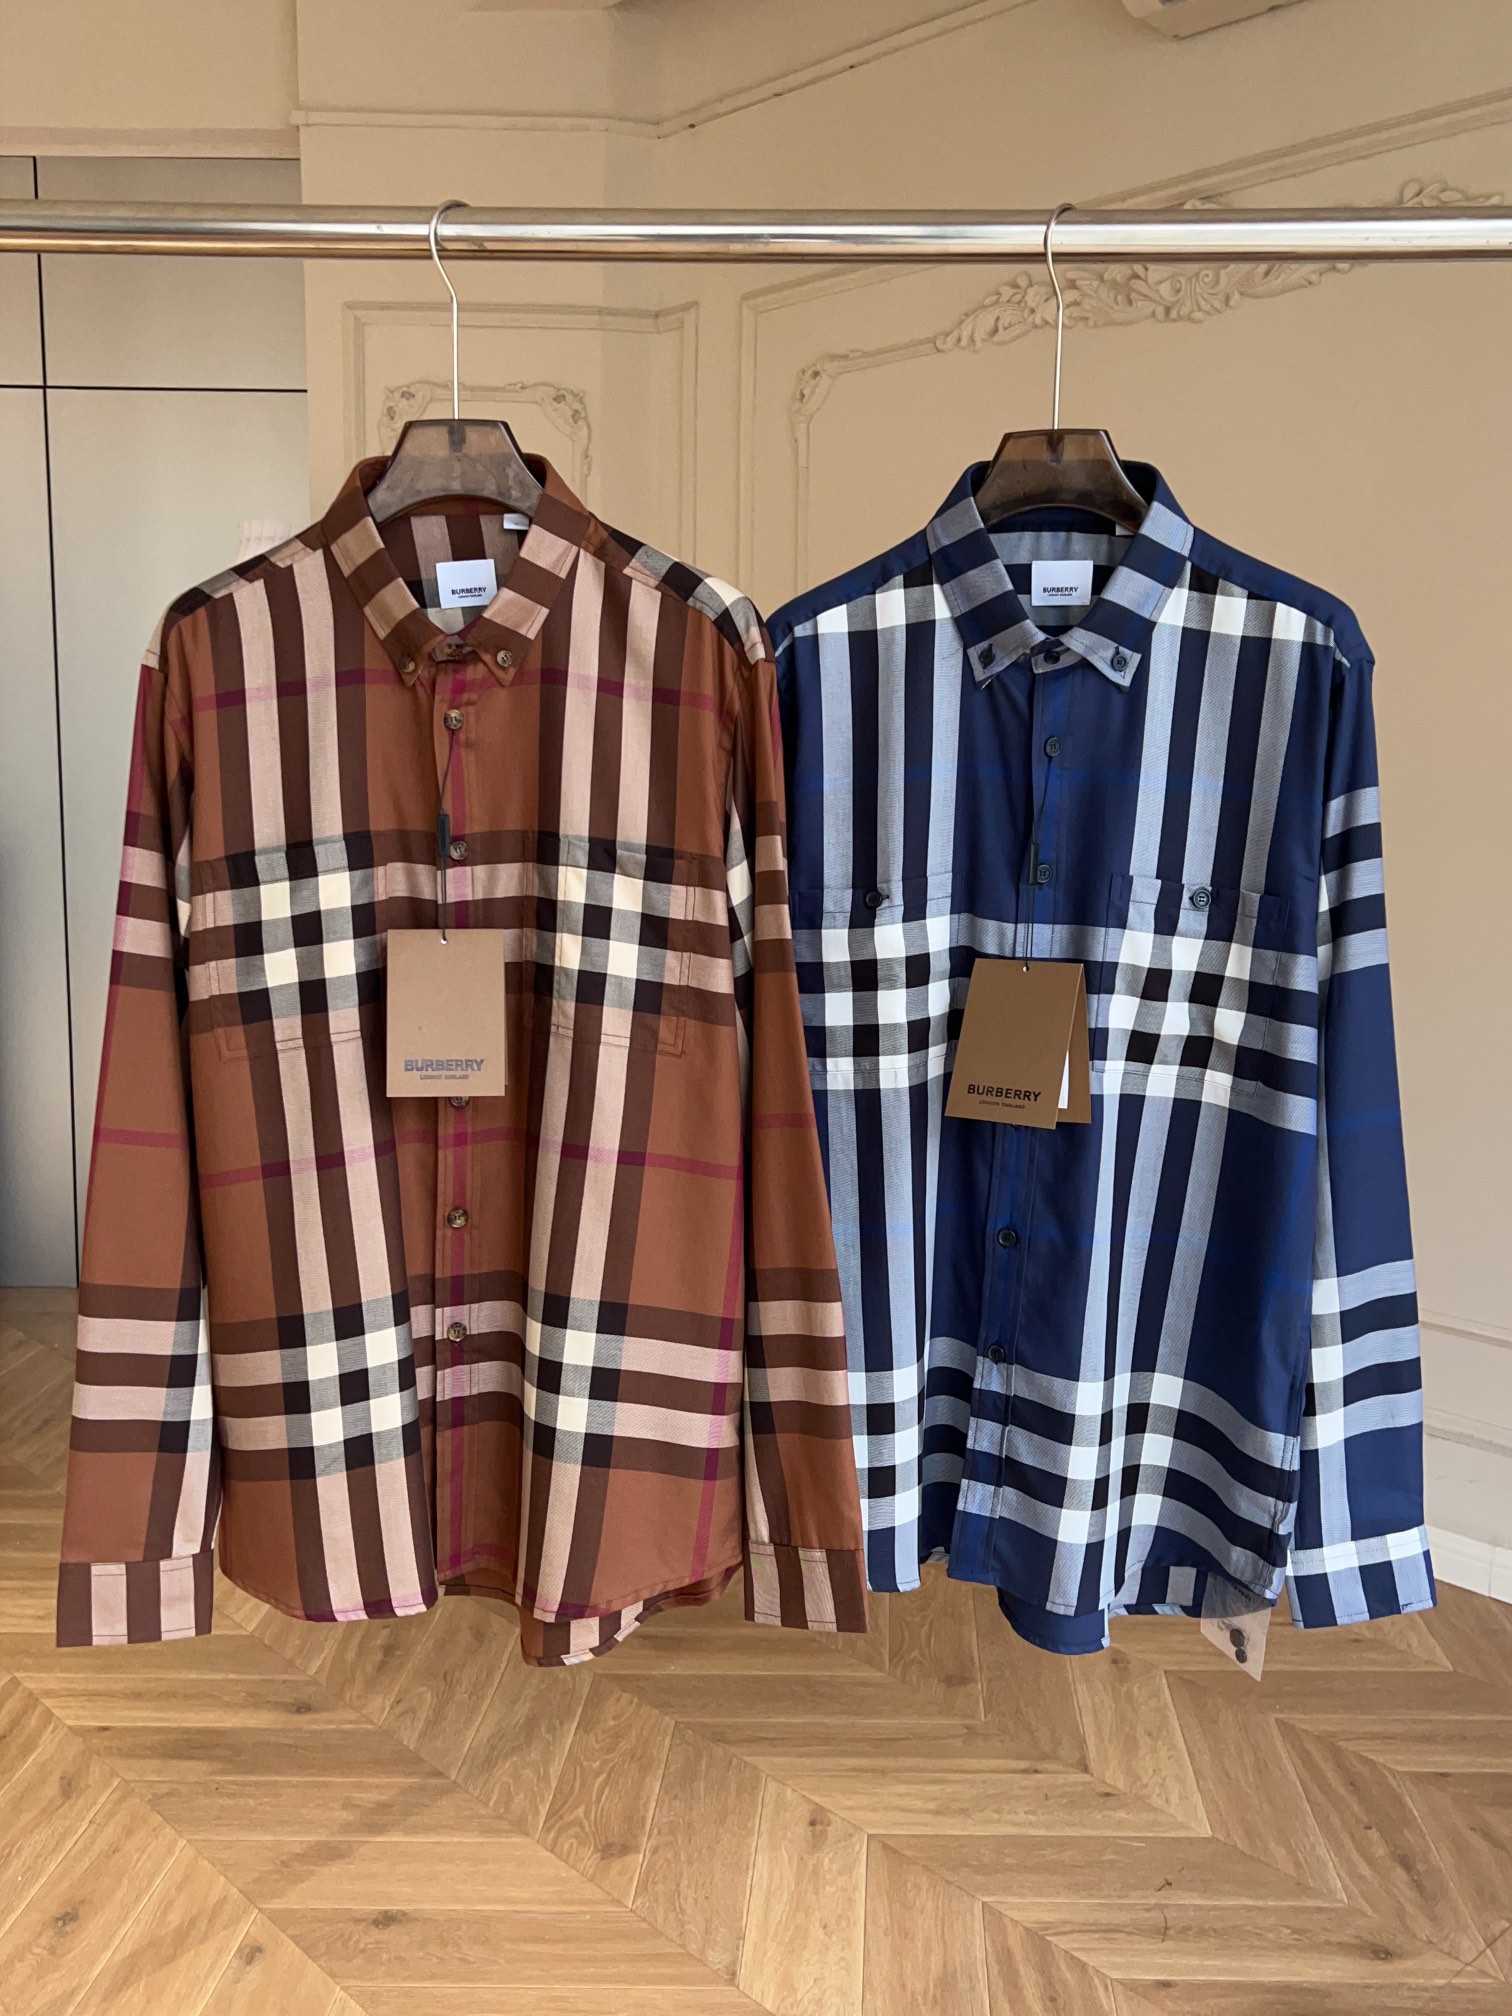 Burberry Clothing Shirts & Blouses Blue Brown Denim White Cotton Poplin Fabric Fall/Winter Collection Vintage